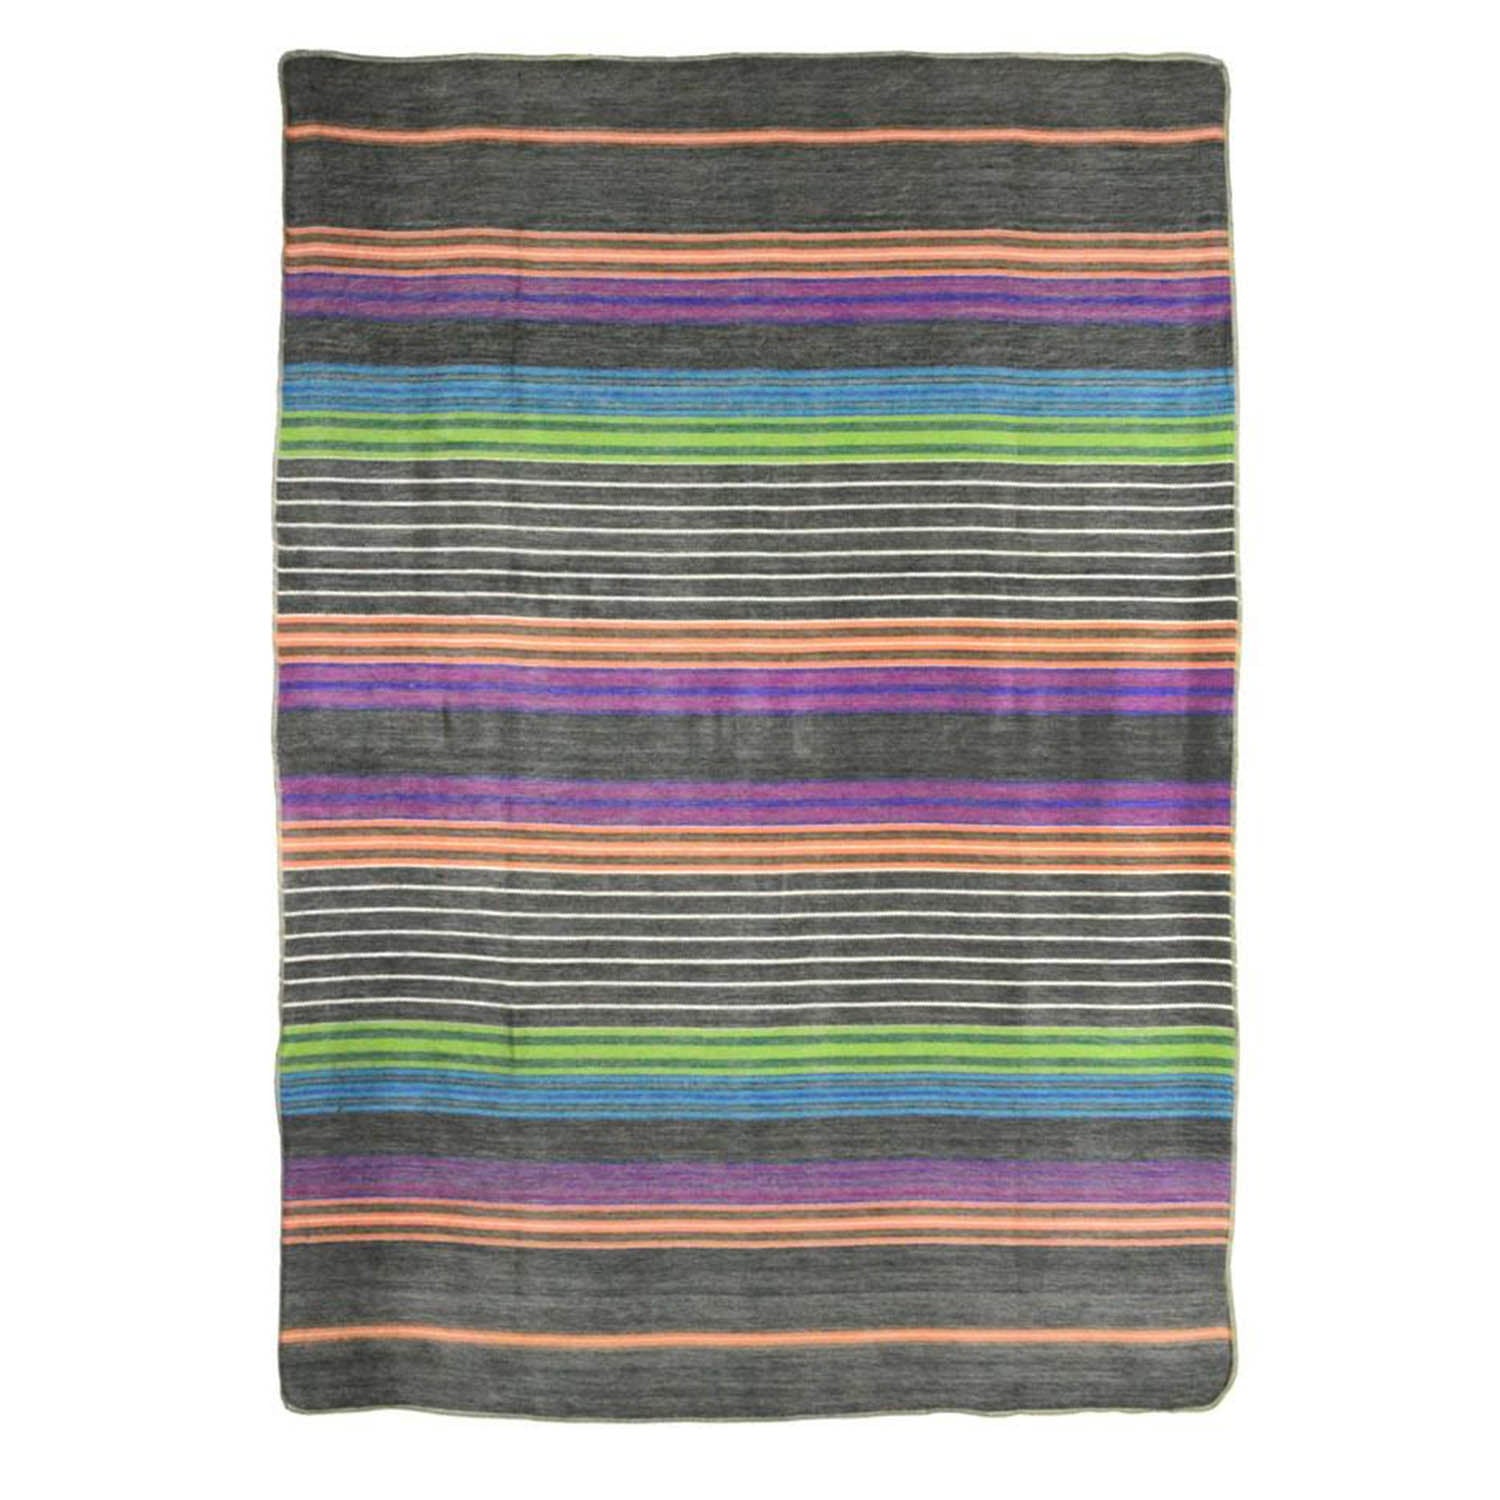 Green and Brown striped throw